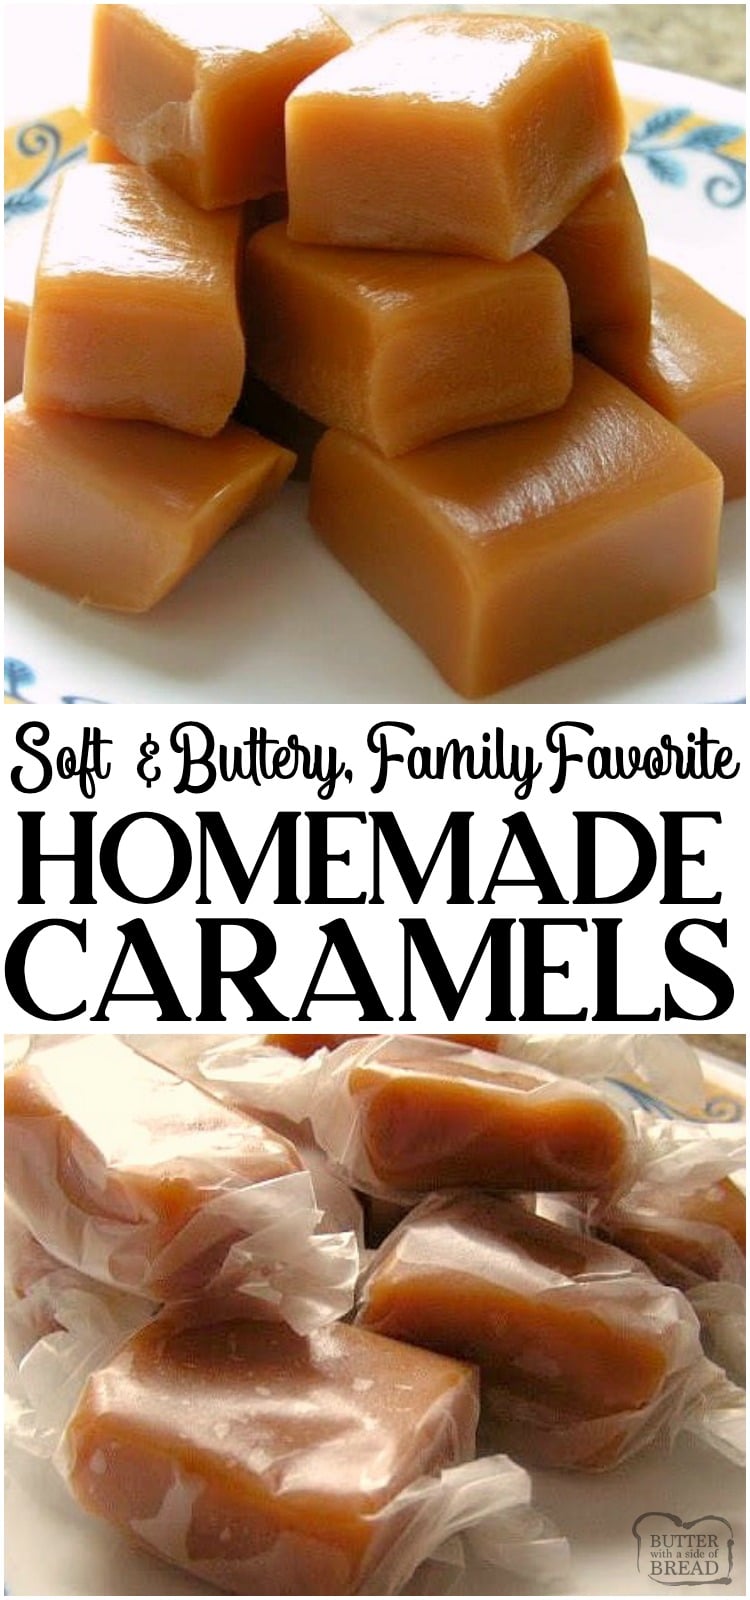 These Homemade Caramels will absolutely melt in your mouth! Incredible from scratch recipe for Homemade Caramel made with heavy cream and butter.